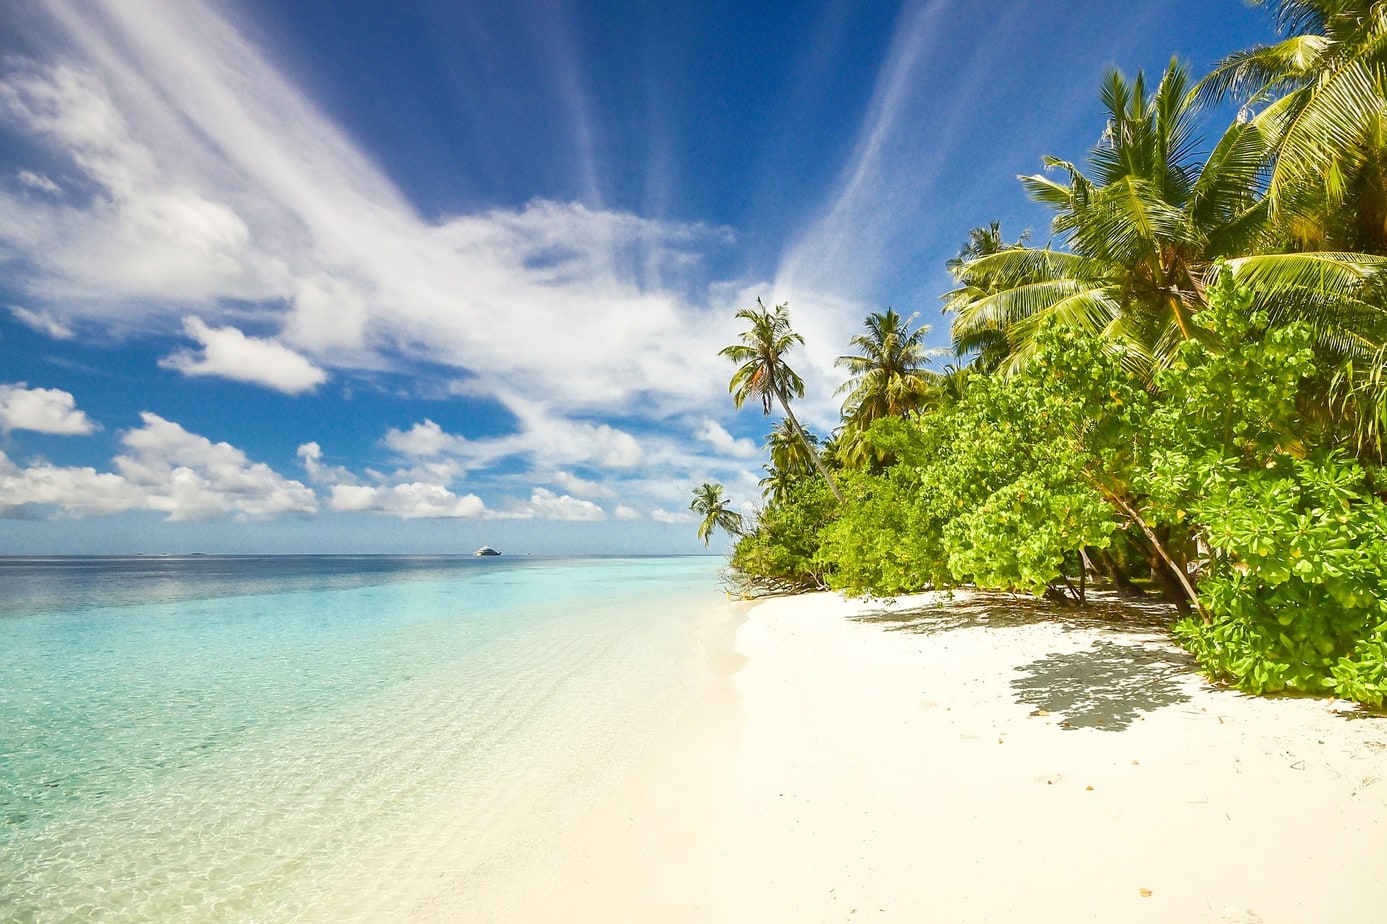 The most beautiful beaches in the world. Where can you find them?